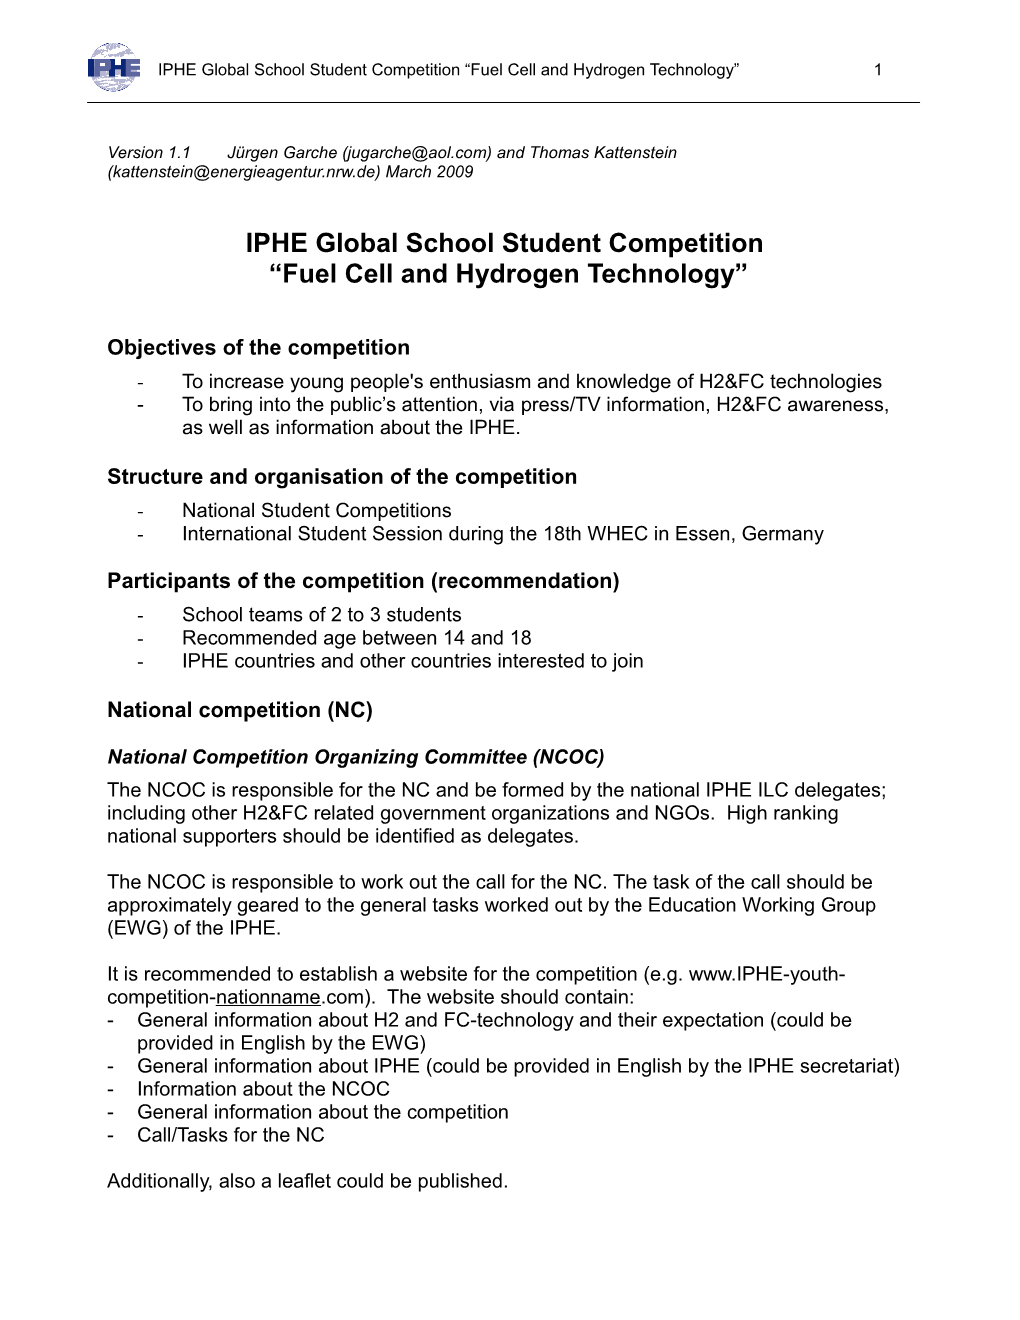 IPHE Global School Student Competition